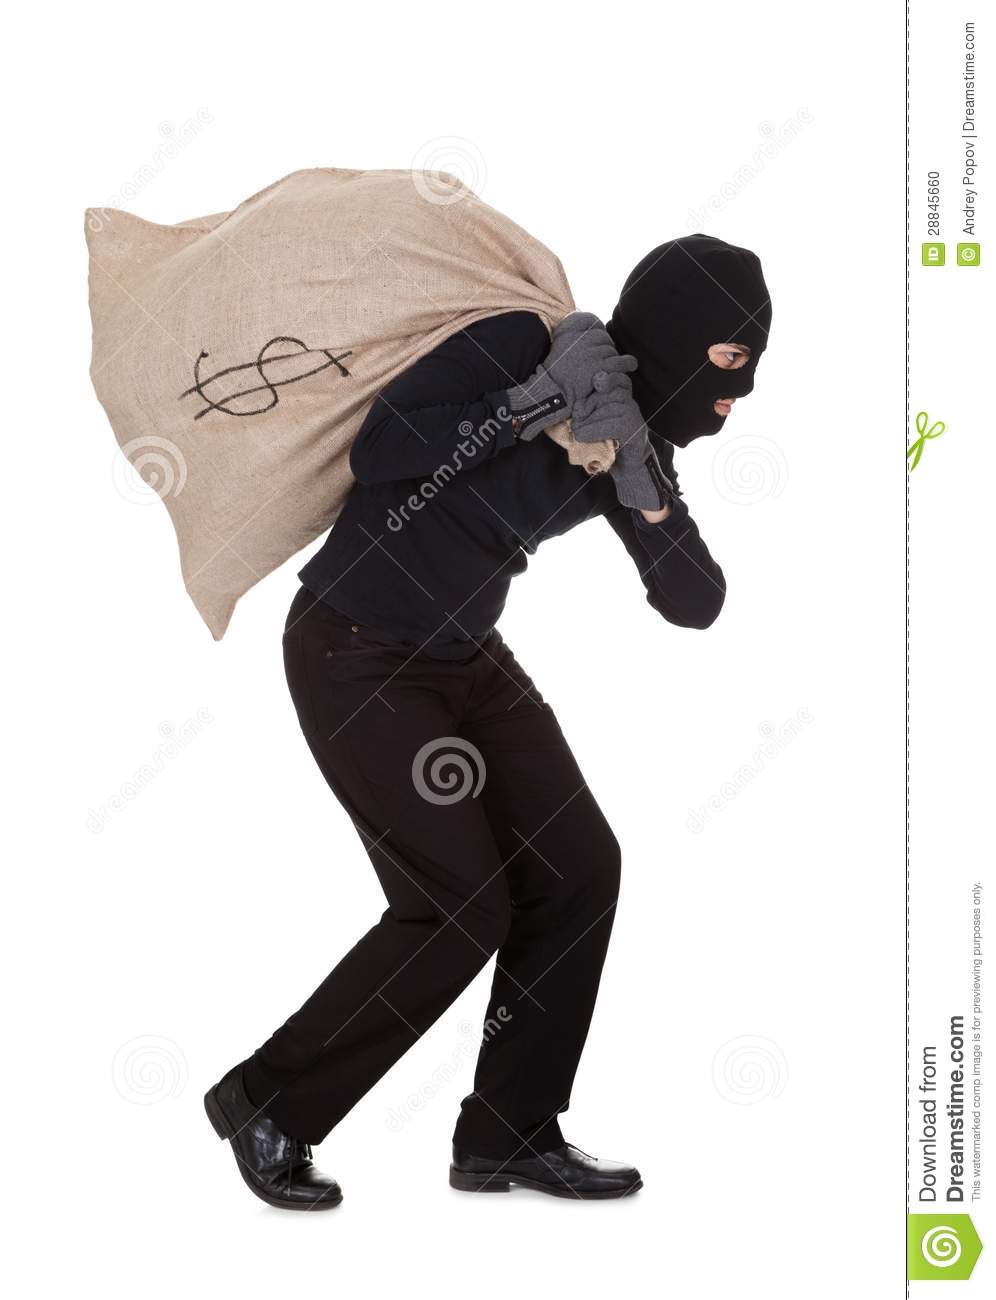 In Black Clothes Wearing A Balaclava Carrying A Large Bag Of Money    